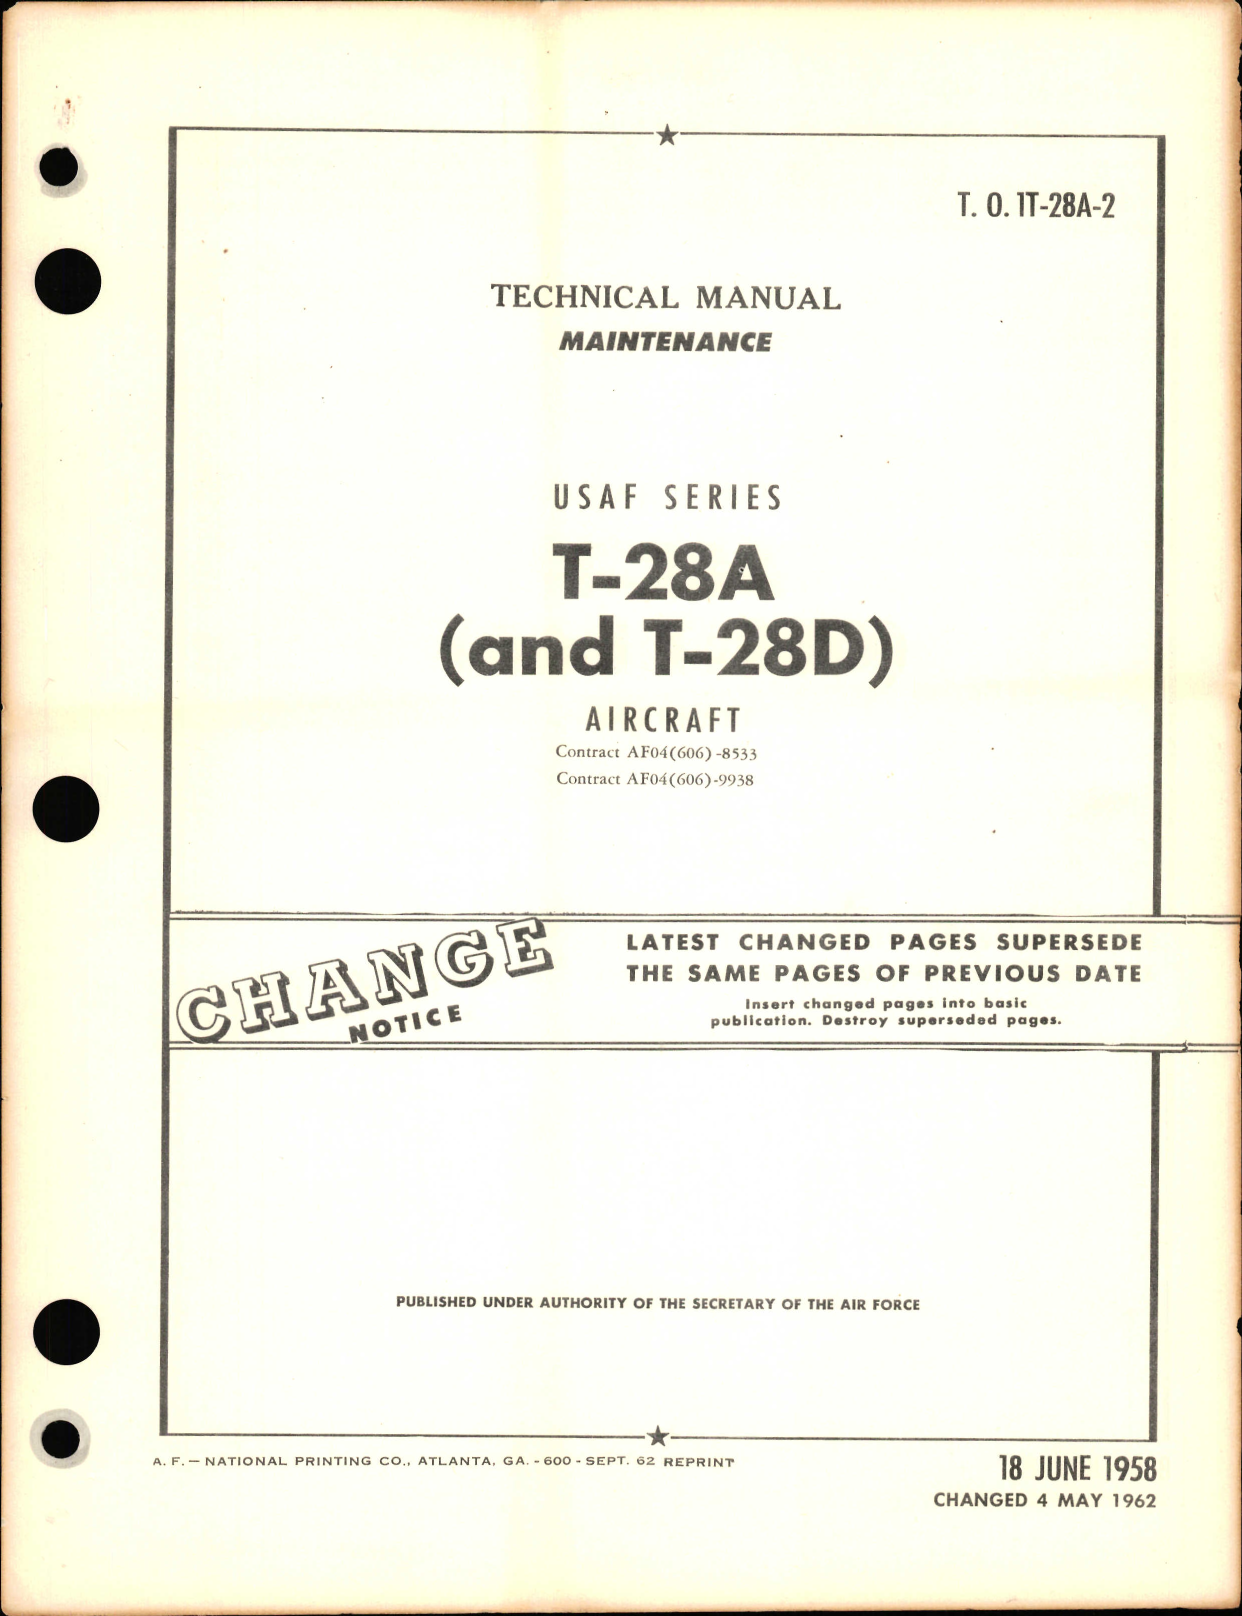 Sample page 1 from AirCorps Library document: Maintenance Manual for T-28A and T-28D